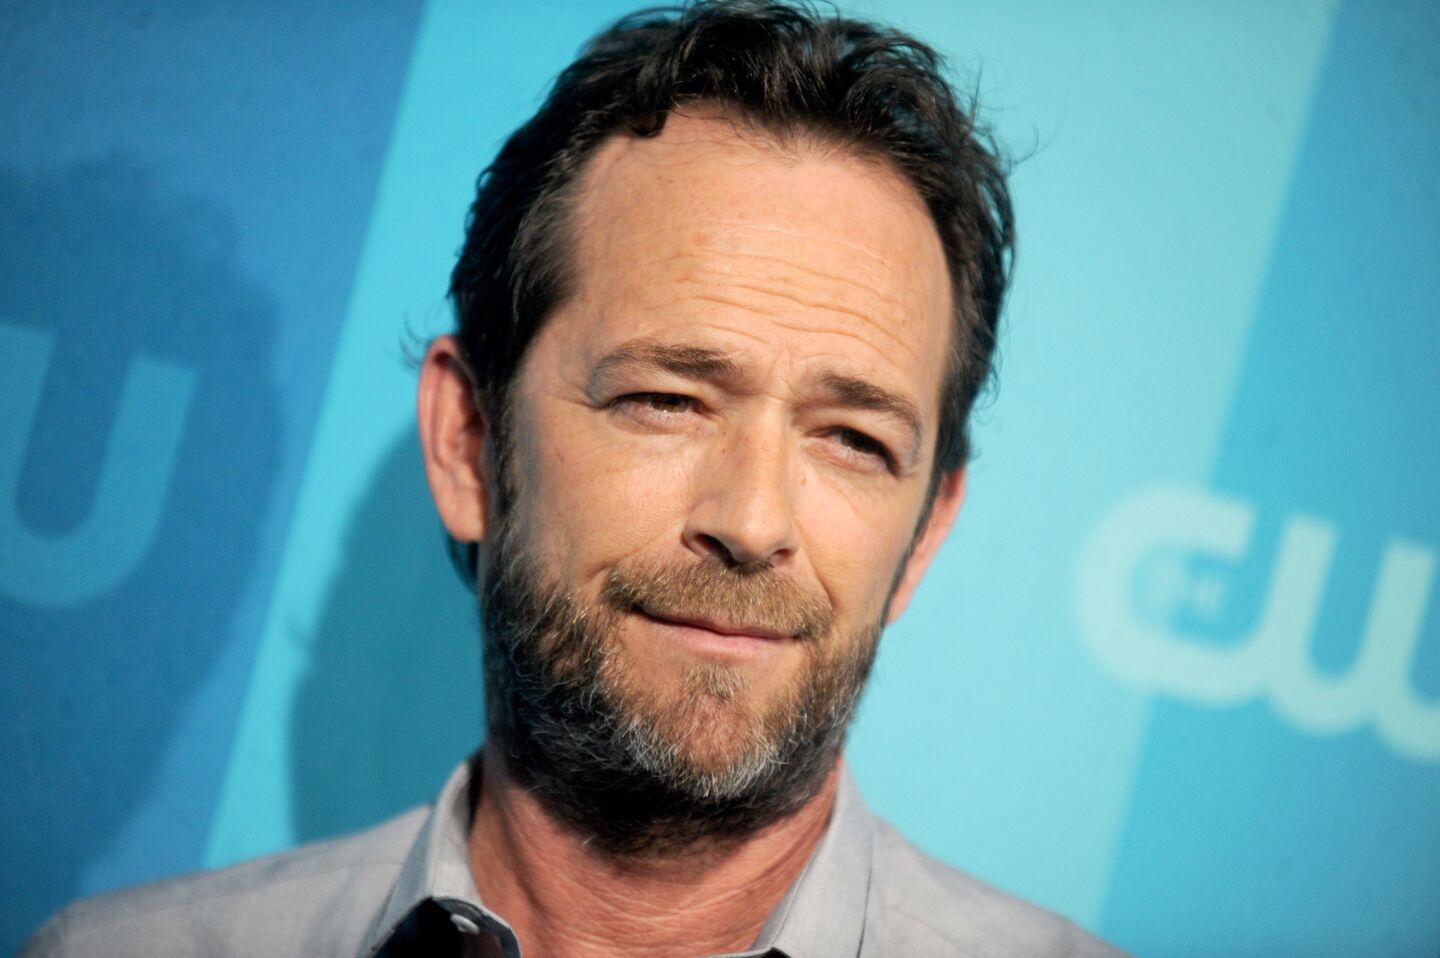 Luke Perry played bad-boy heartthrob Dylan McKay in the 1990s TV drama "Beverly Hills, 90210." The series put the affluent ZIP Code on the map as it became a pop-cultural phenomenon with Perry as the disaffected, ever-mysterious love interest of the romantic leads. He was 52.